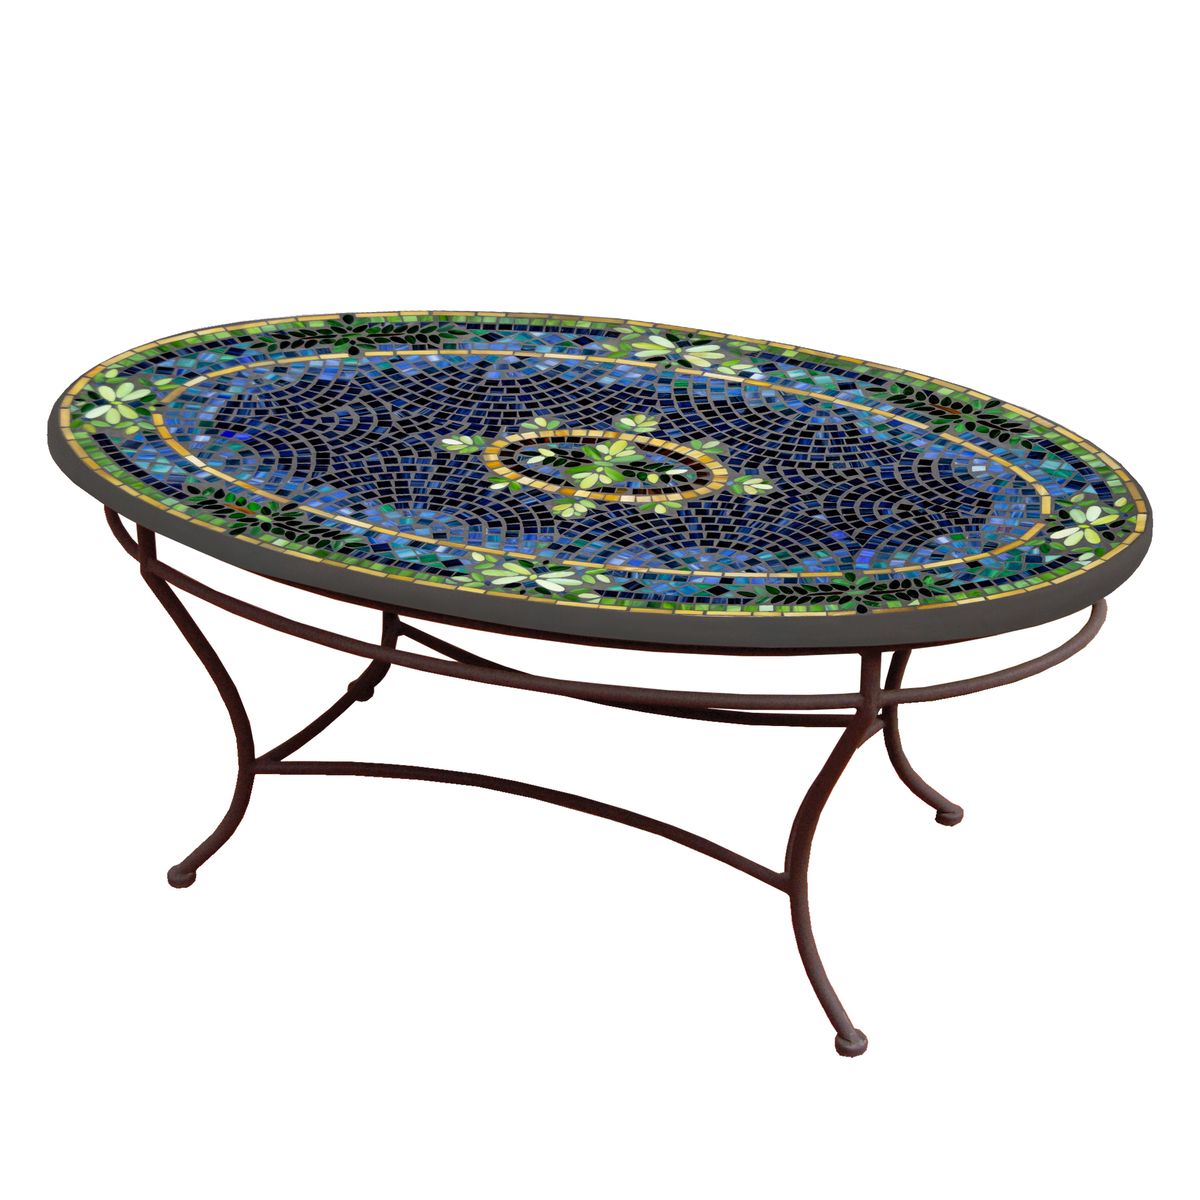 Lake Como Mosaic Coffee Table - Oval-Iron Accents